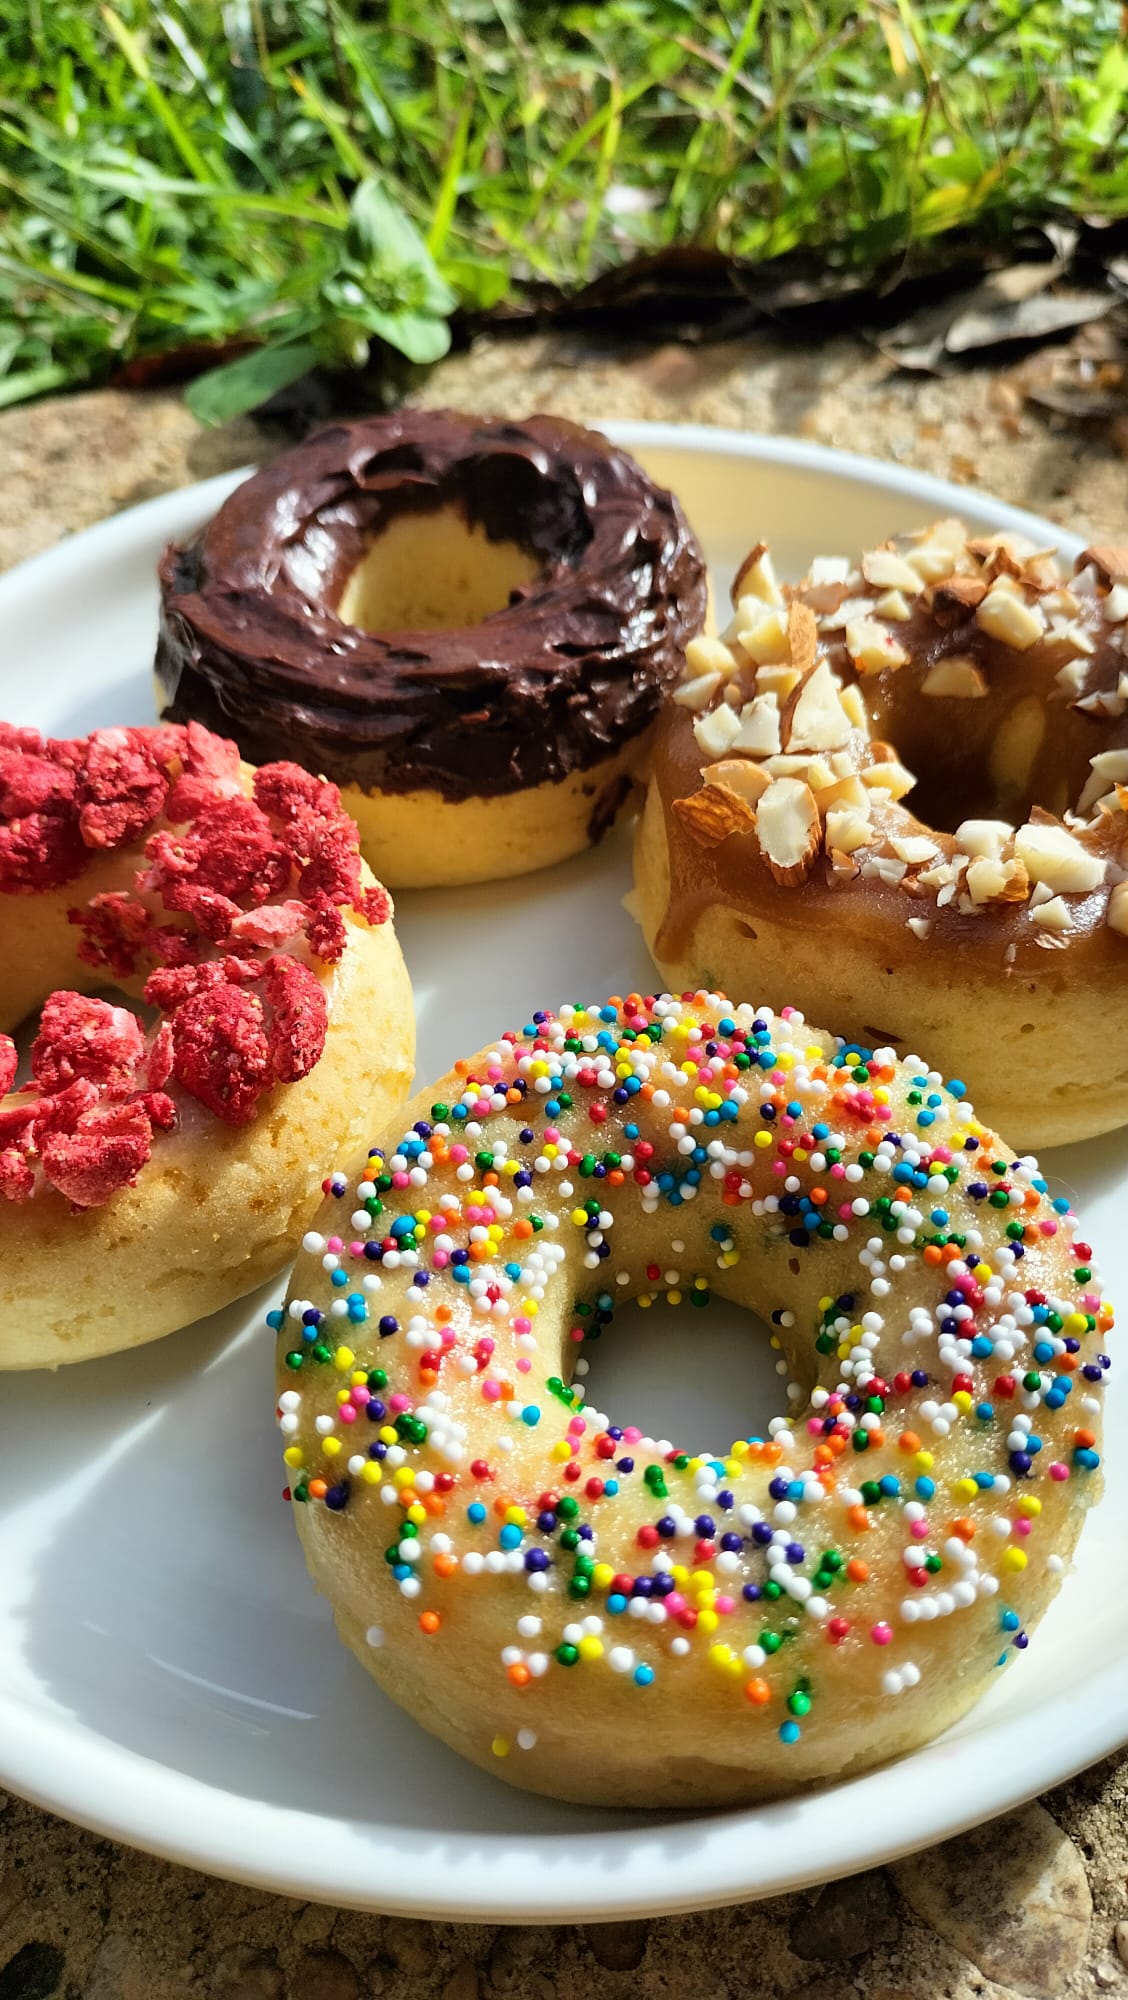 AMERICAN DONUTS con frosting e toppings vari